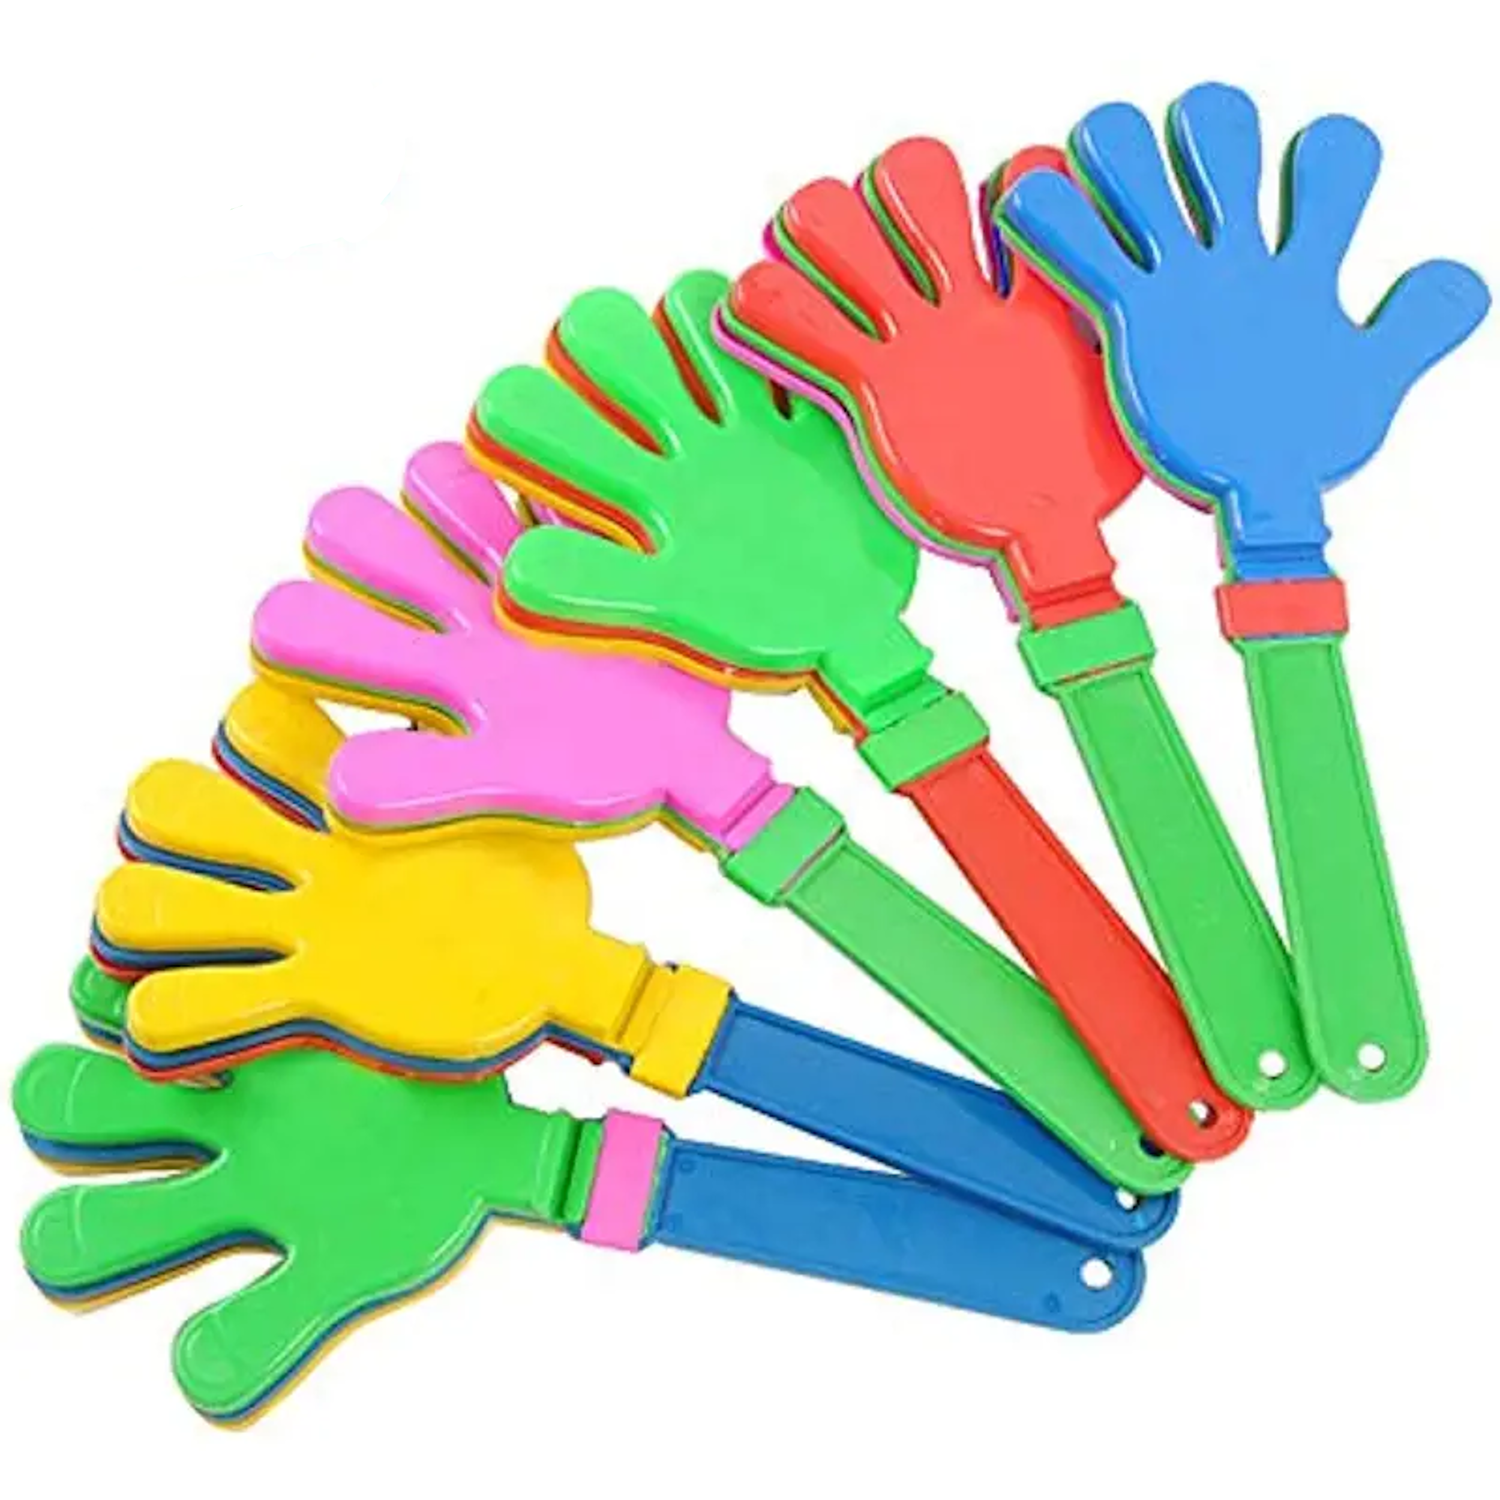 Personalized Mega Hand Clappers